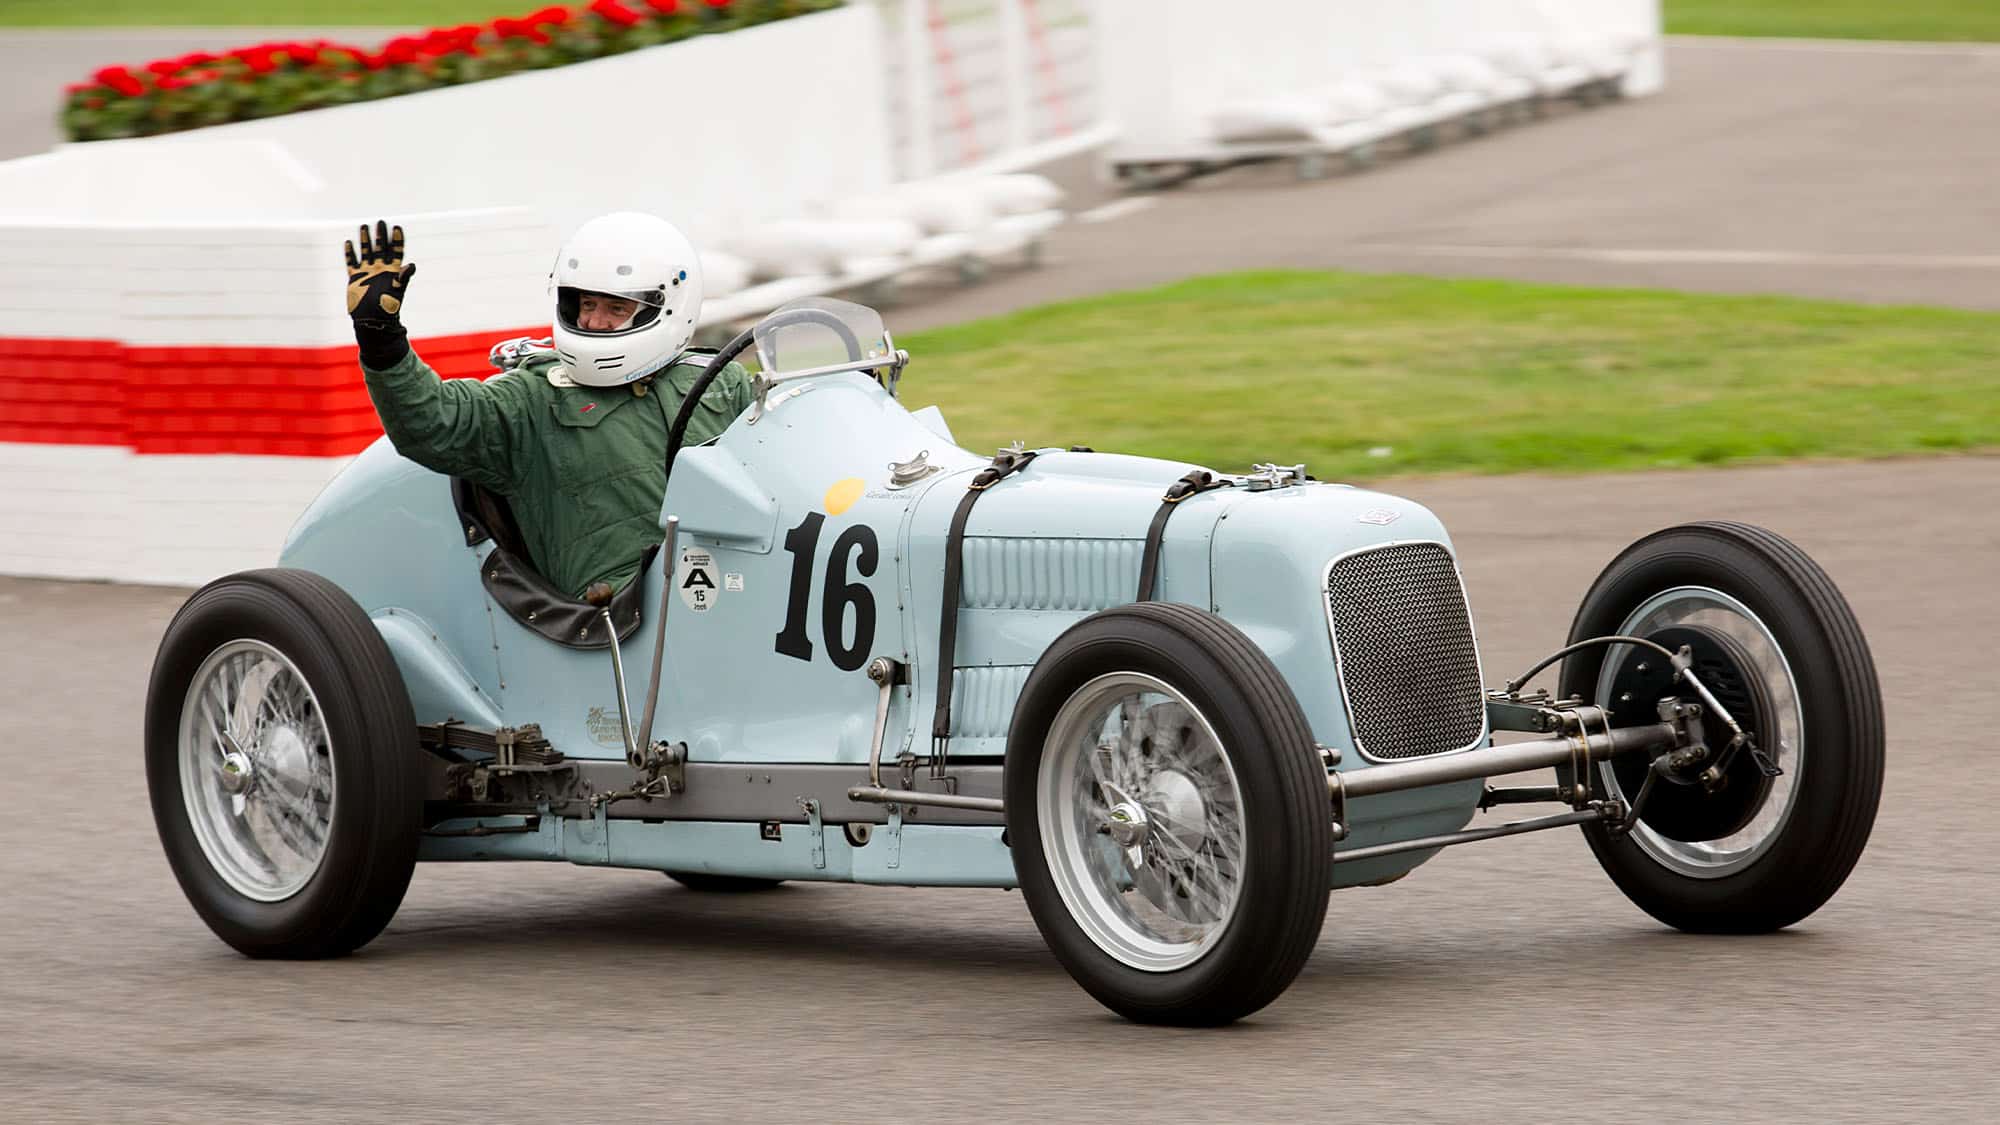 CHICHESTER, ENGLAND - SEPTEMBER 09: 1936 Frazer Nash Monoposto owned by Martin Lewis and being driven by Geraint Lewis in The Goodwood Trophy race at Goodwood on September 9, 2016 in Chichester, England. (Photo by Michael Cole/Corbis via Getty Images)